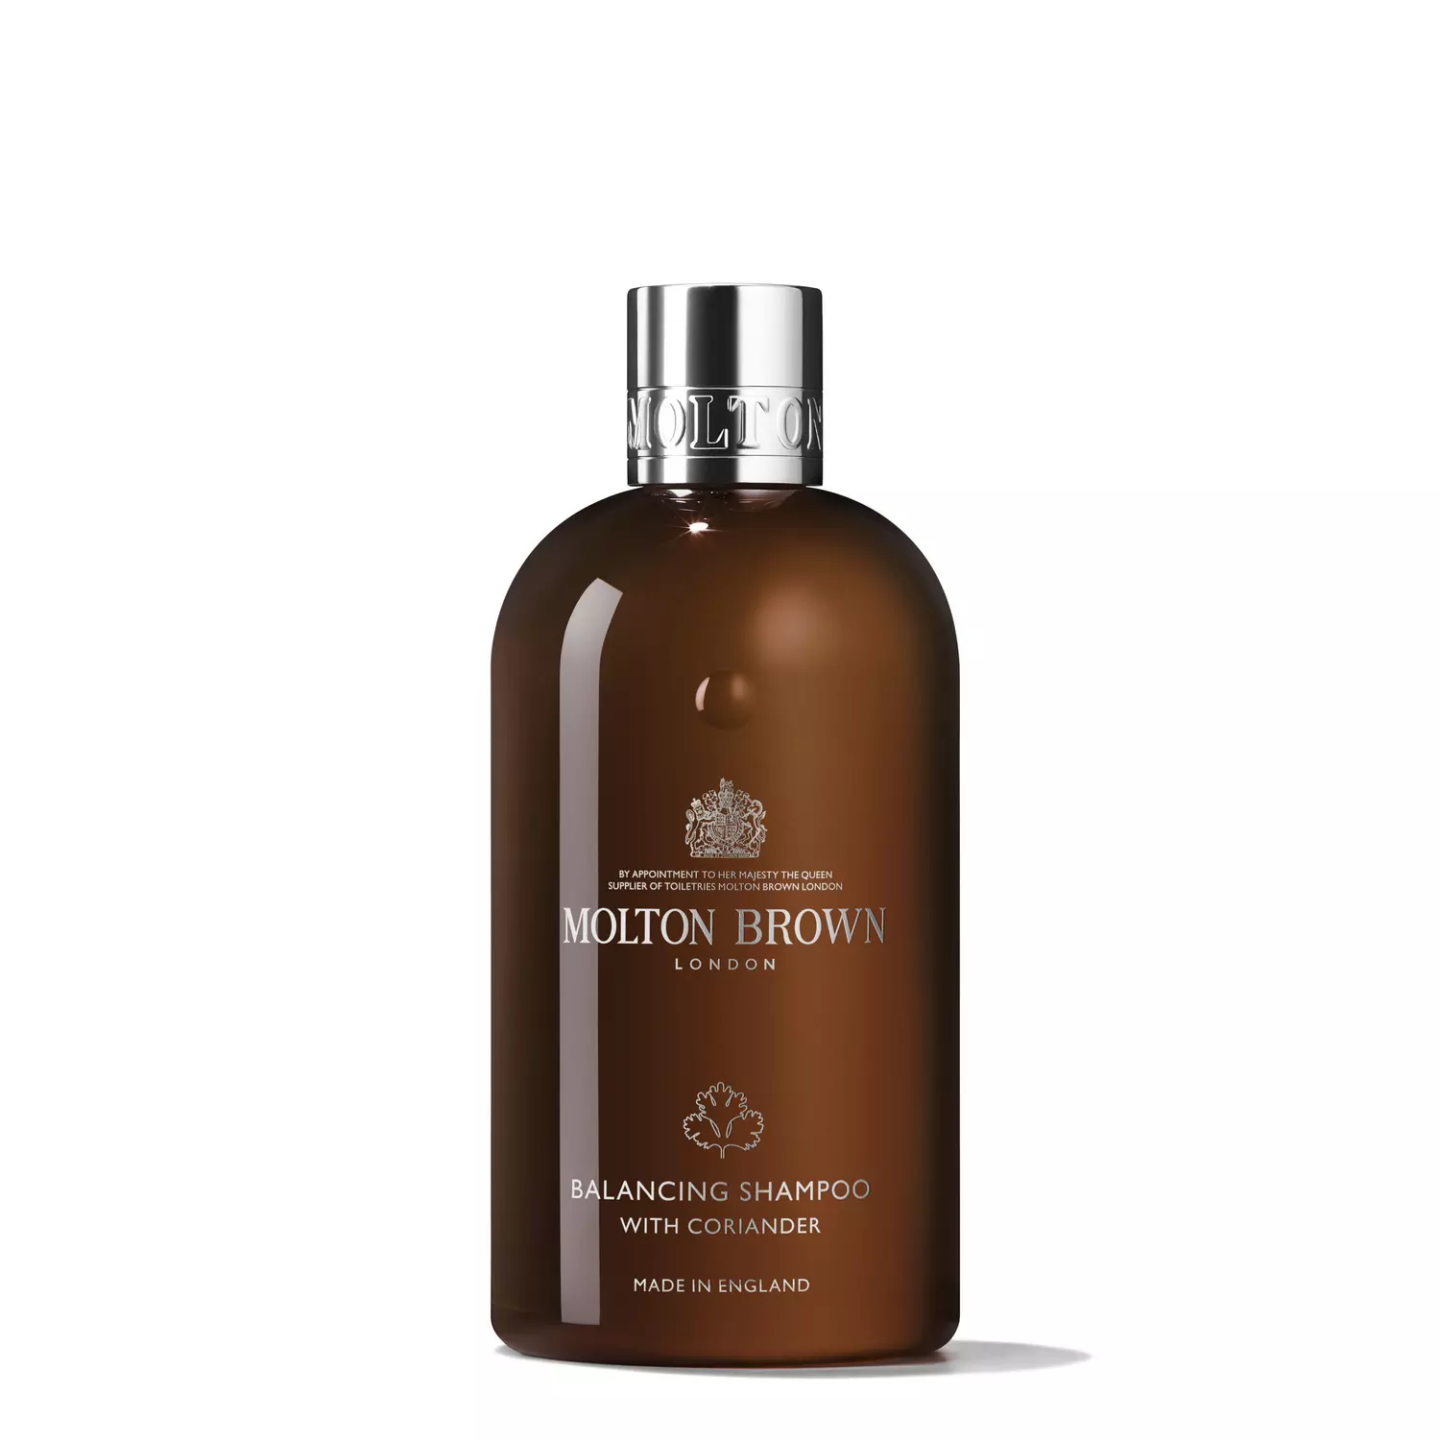 Best Smelling Shampoos for Men - Molton Brown